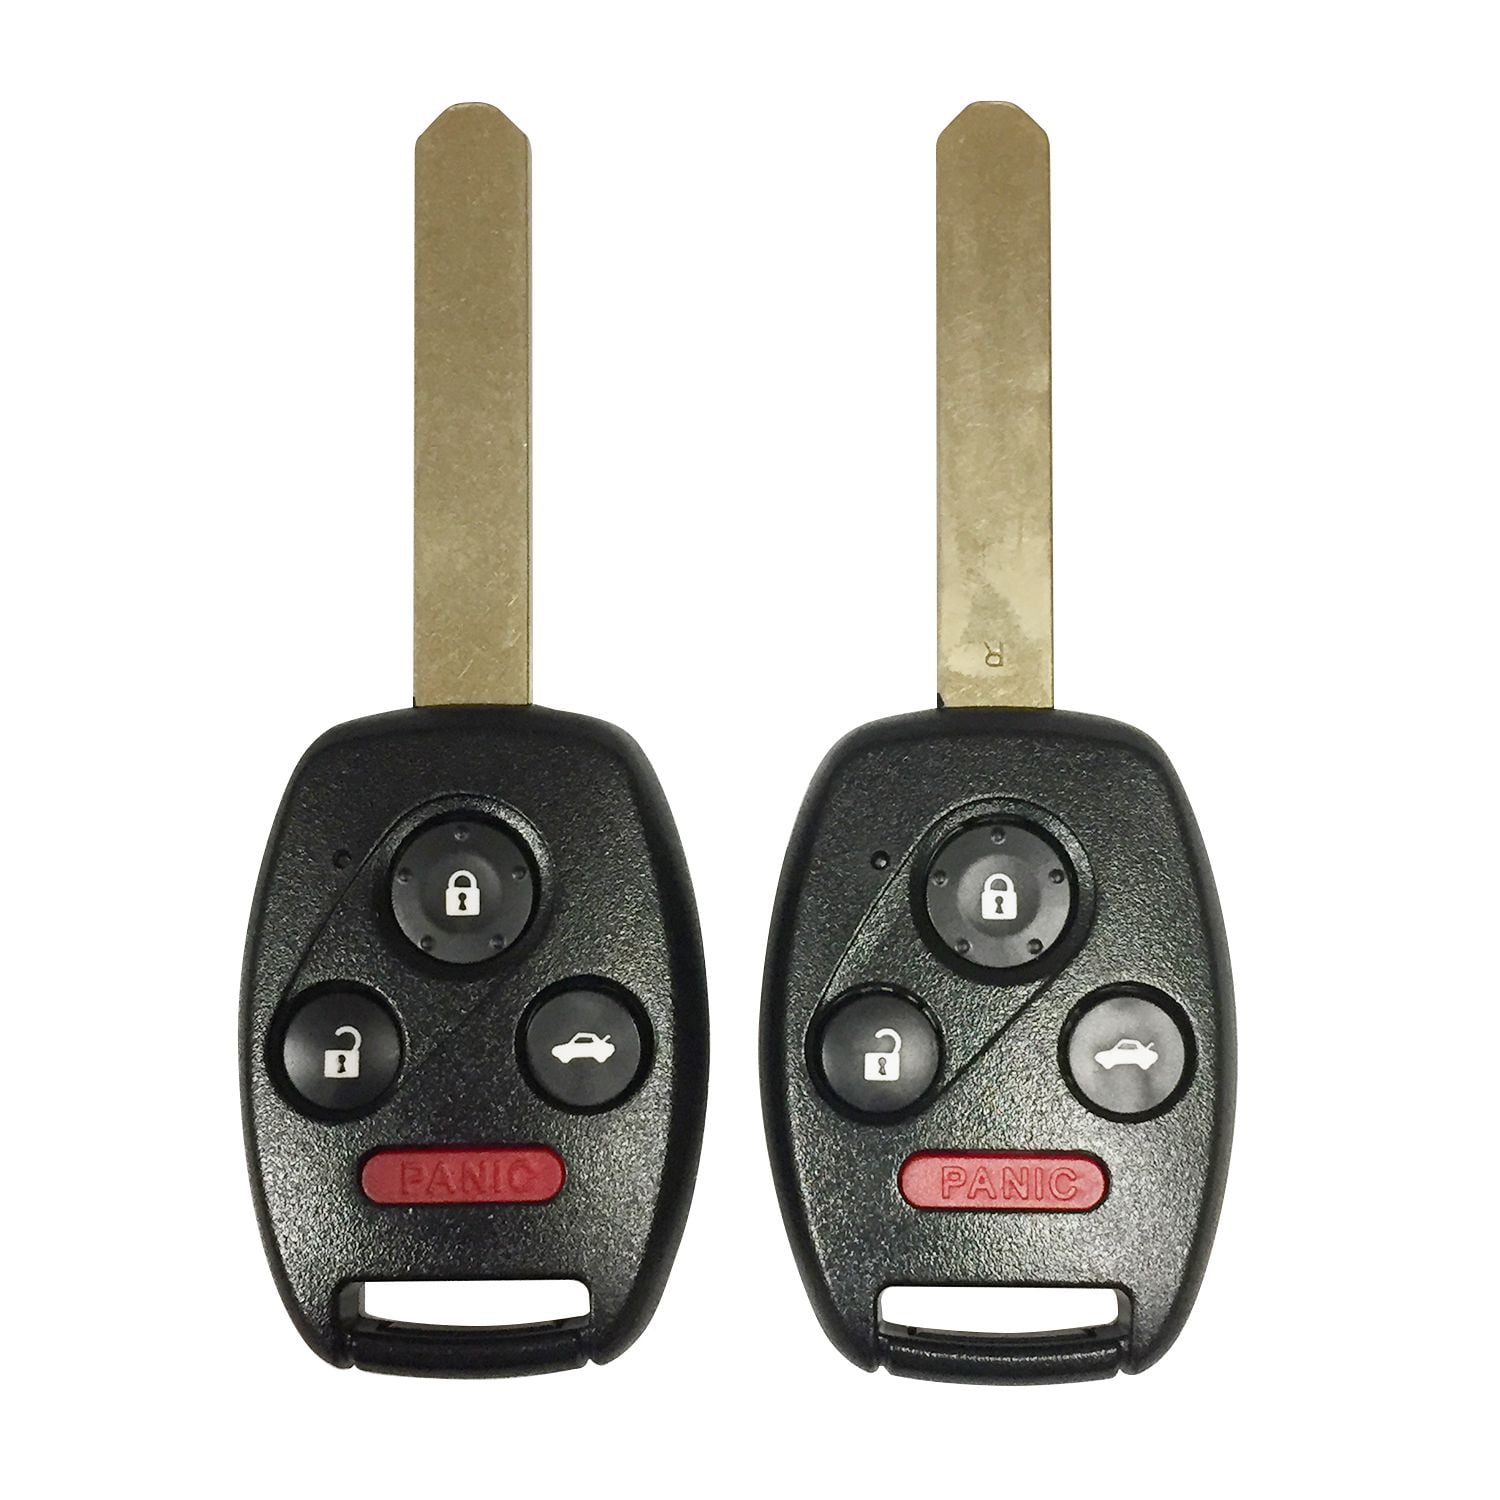 NEW HONDA REPLACEMENT UNCUT CAR KEY KEYLESS ENTRY REMOTE COMBO 3 BUTTON PAIR